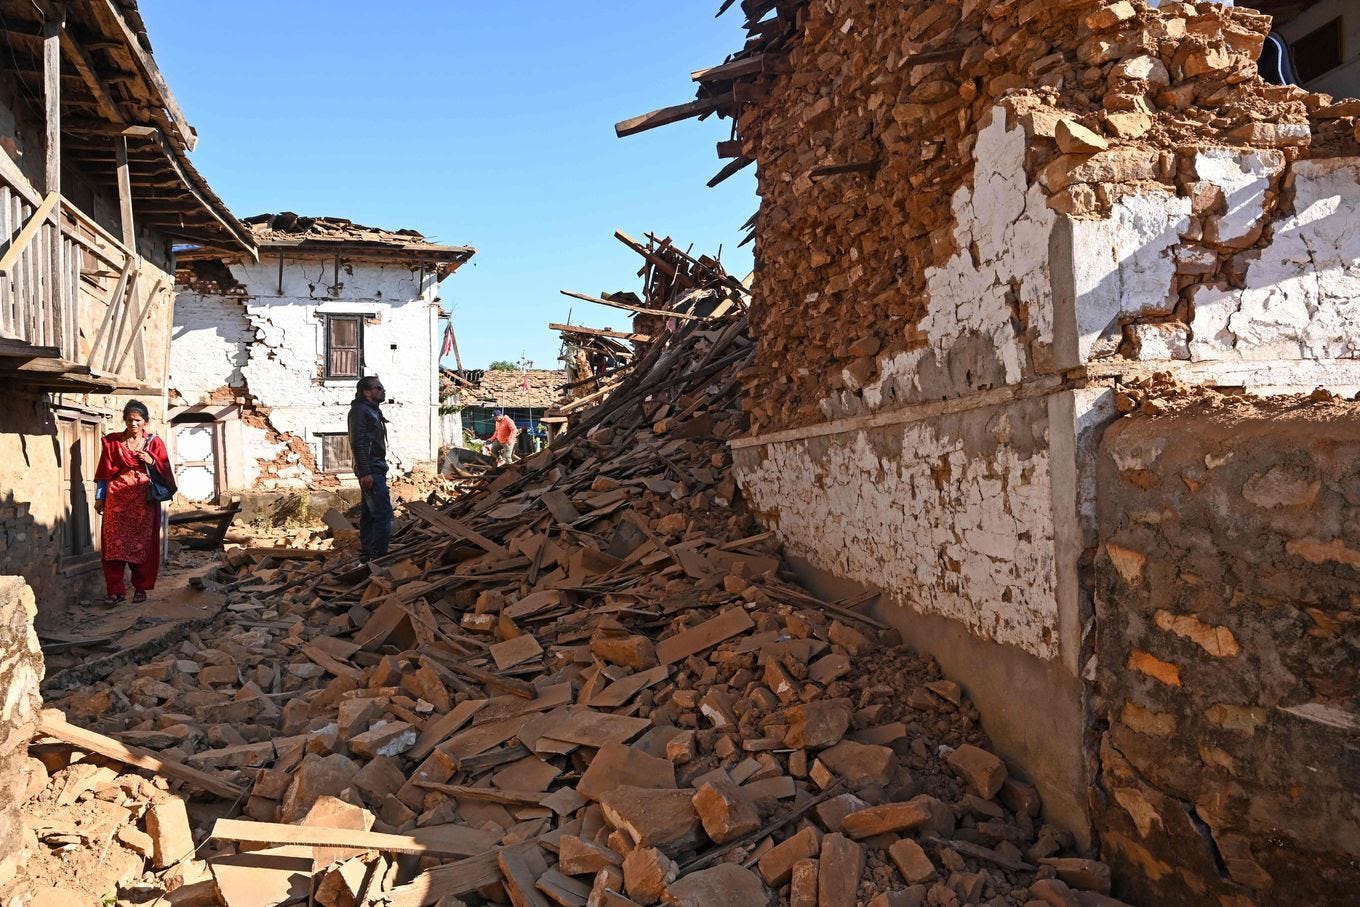 A man looks at damage from the earthquake. (Prakash Mathema/AFP/Getty Images)